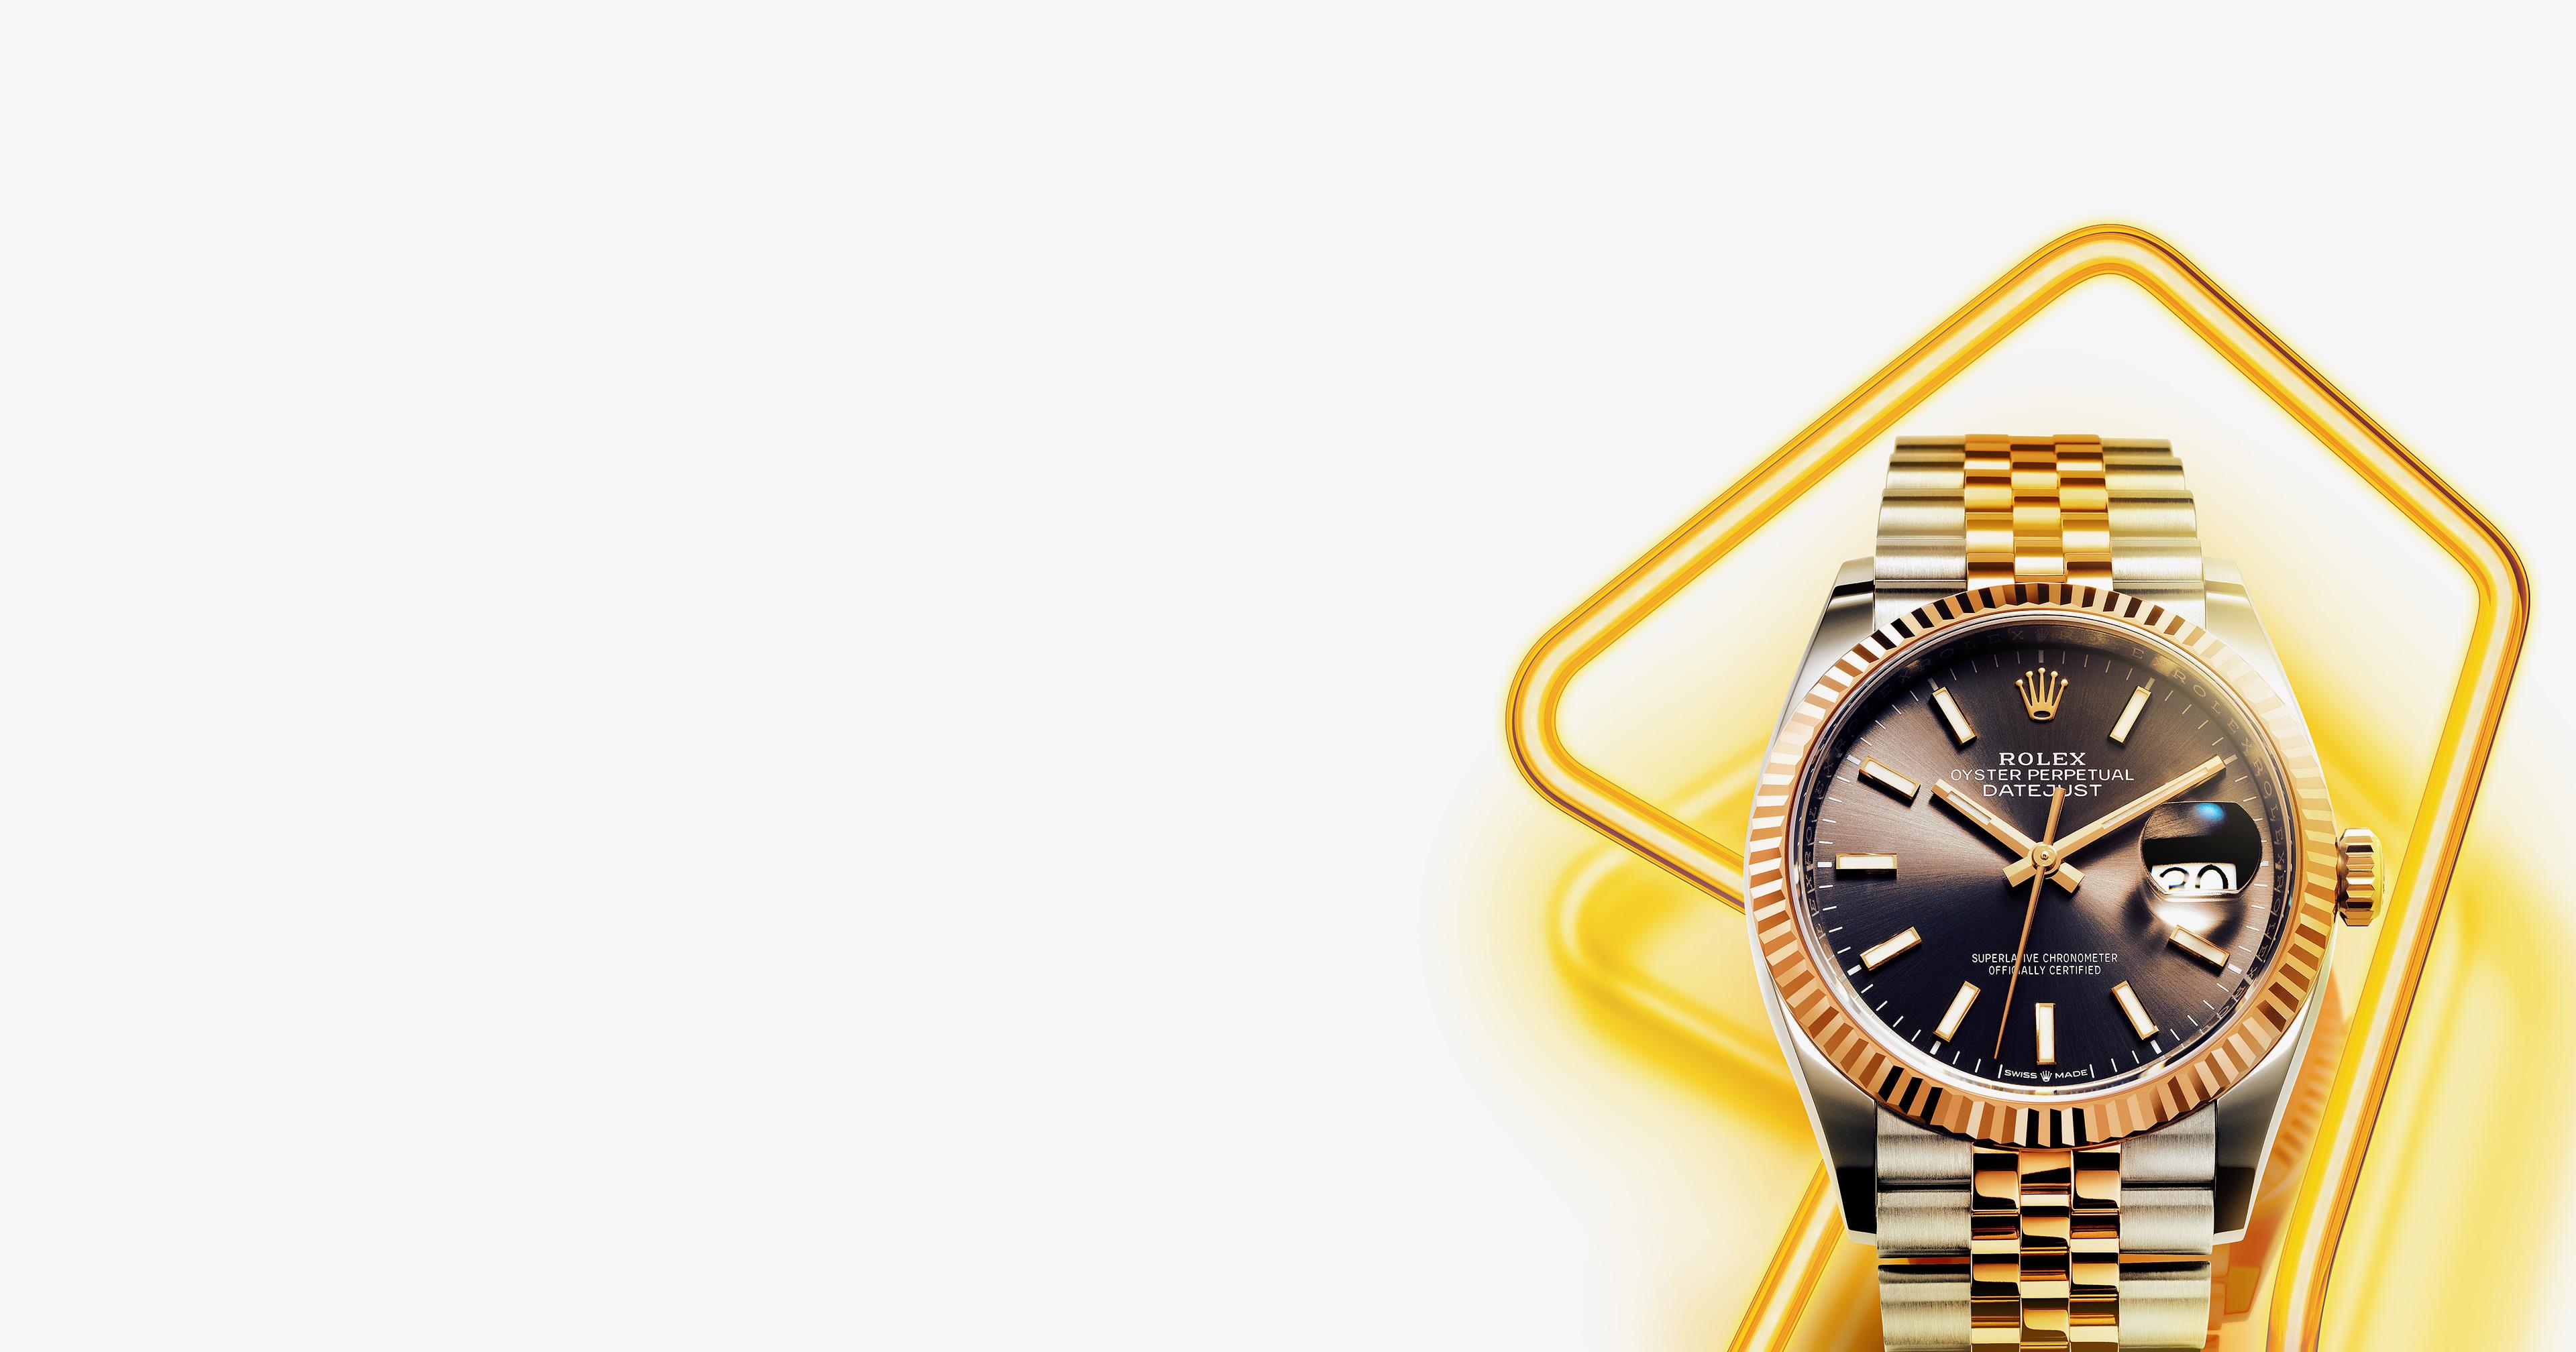 Rolex watch under yellow neon light – post production and 3D/CGI effects by Vibe for Men’s Health Synchronised